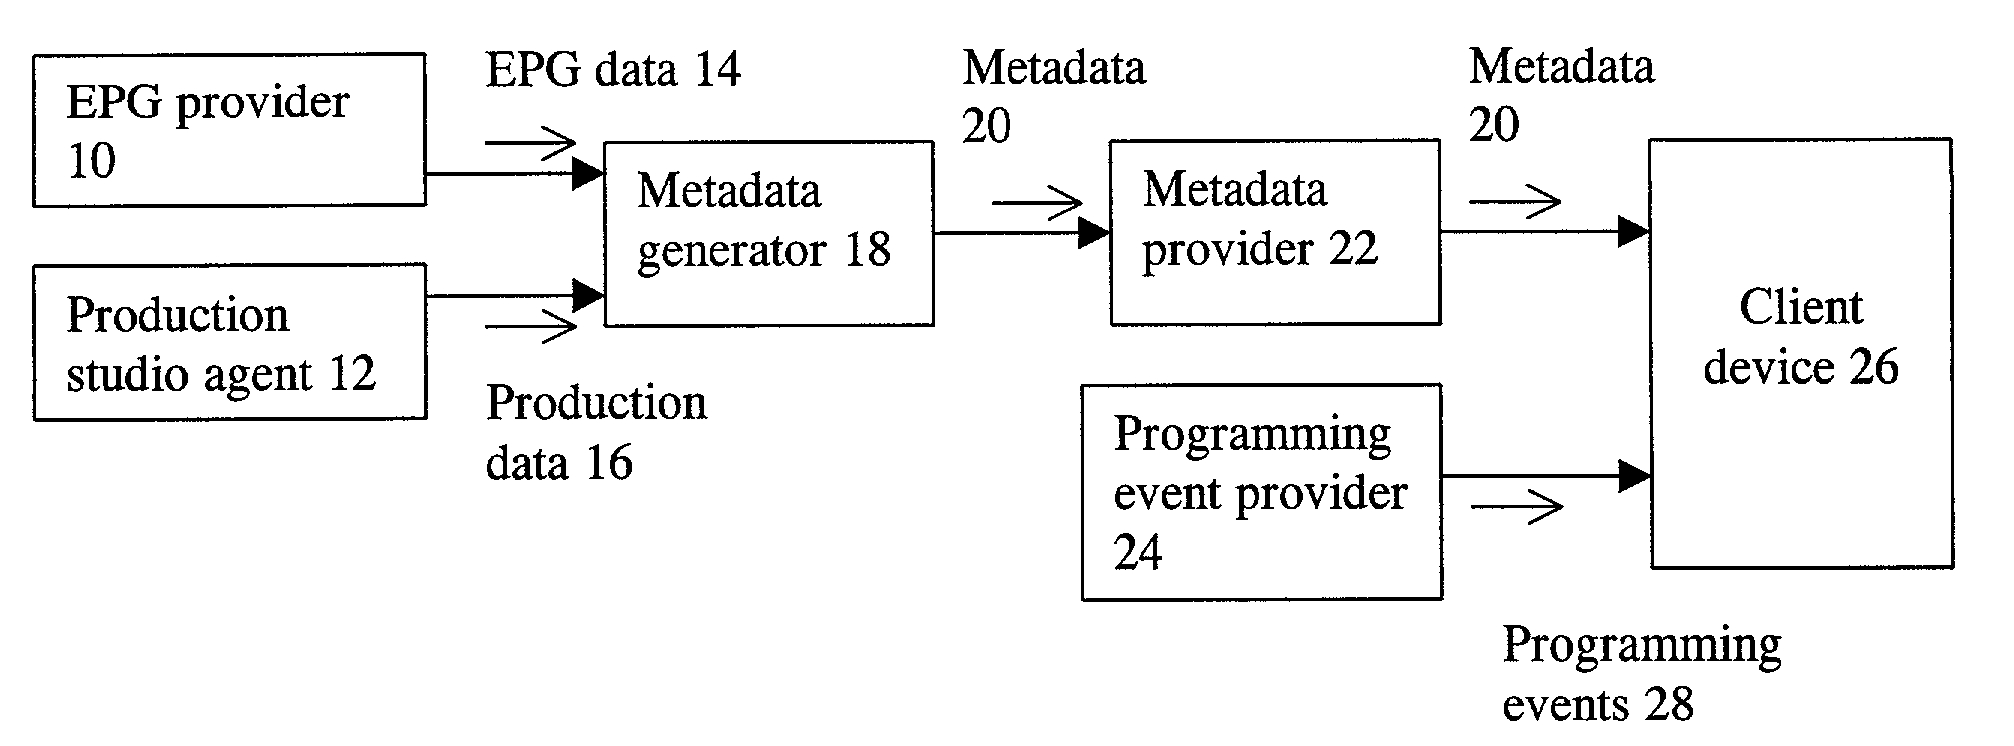 System and method for generating metadata for segments of a video program